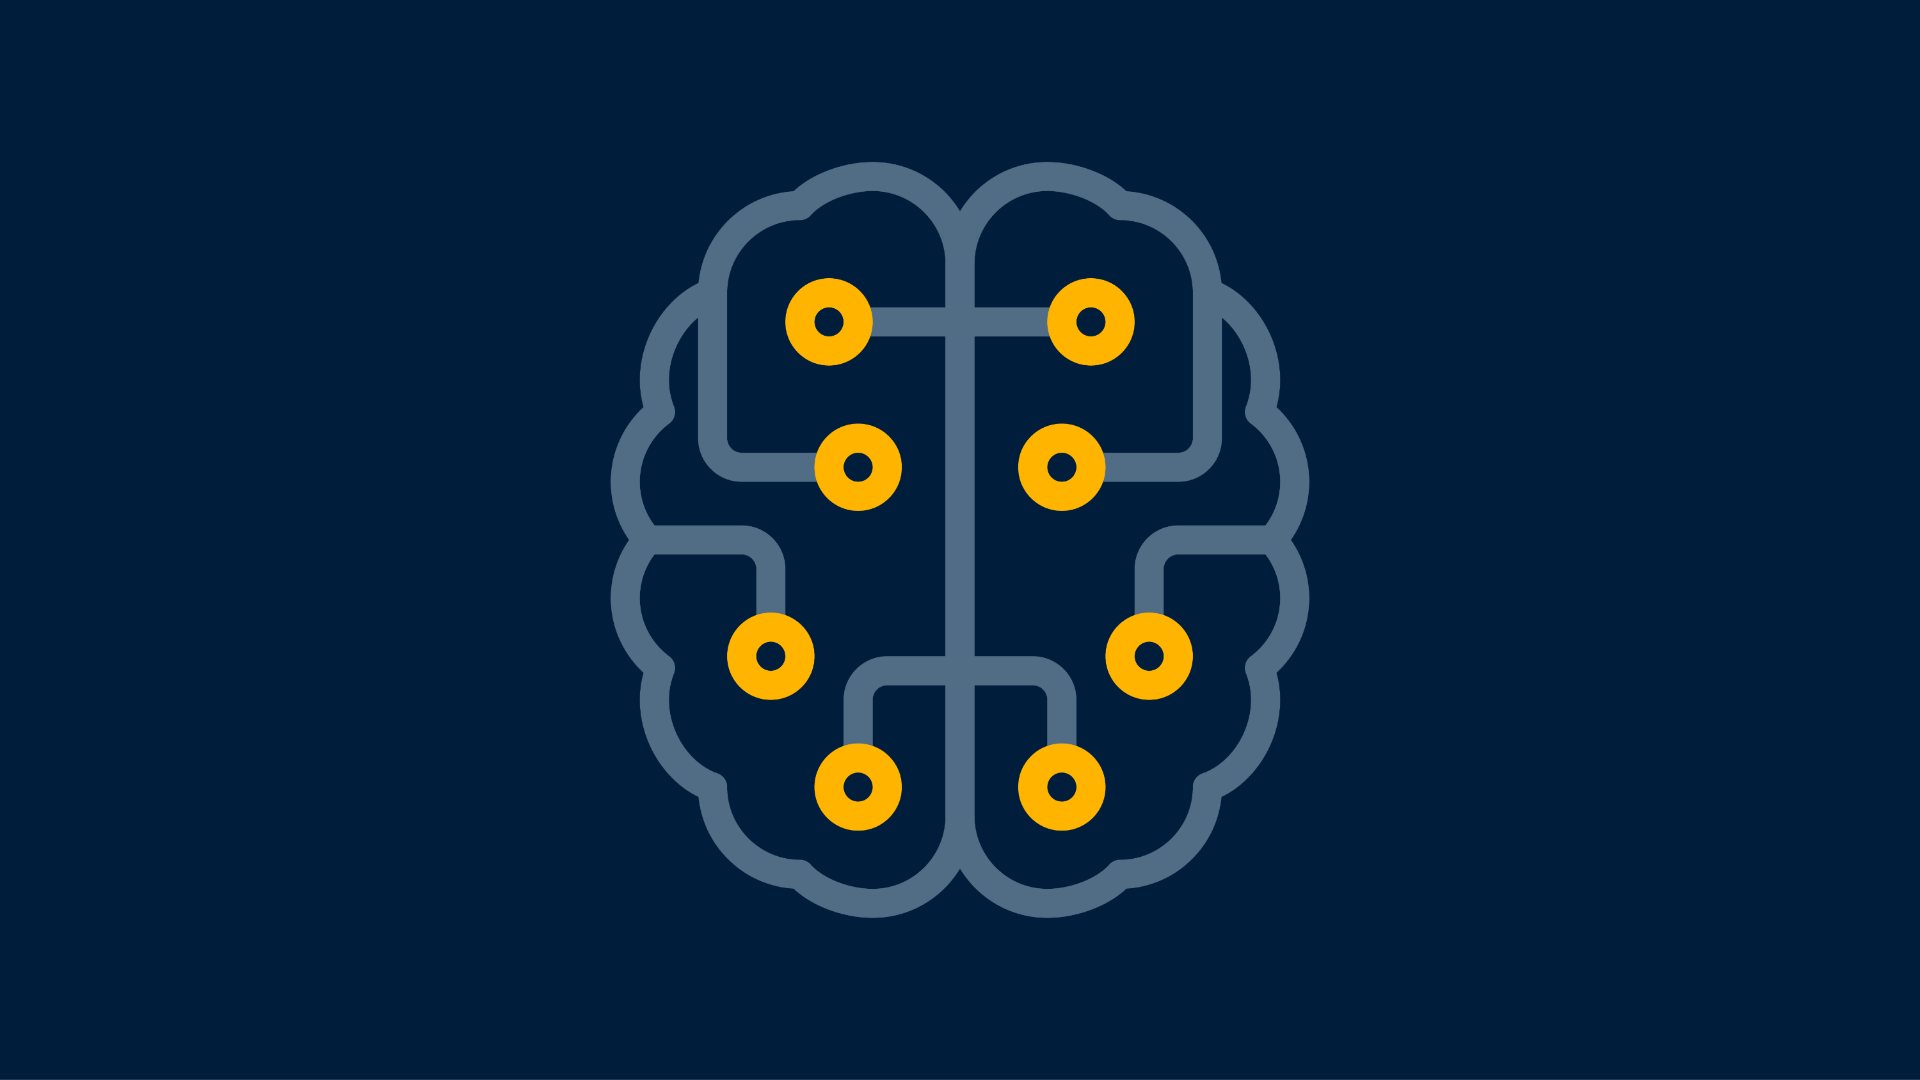 Pictogram with networked brain structures | Automated solution